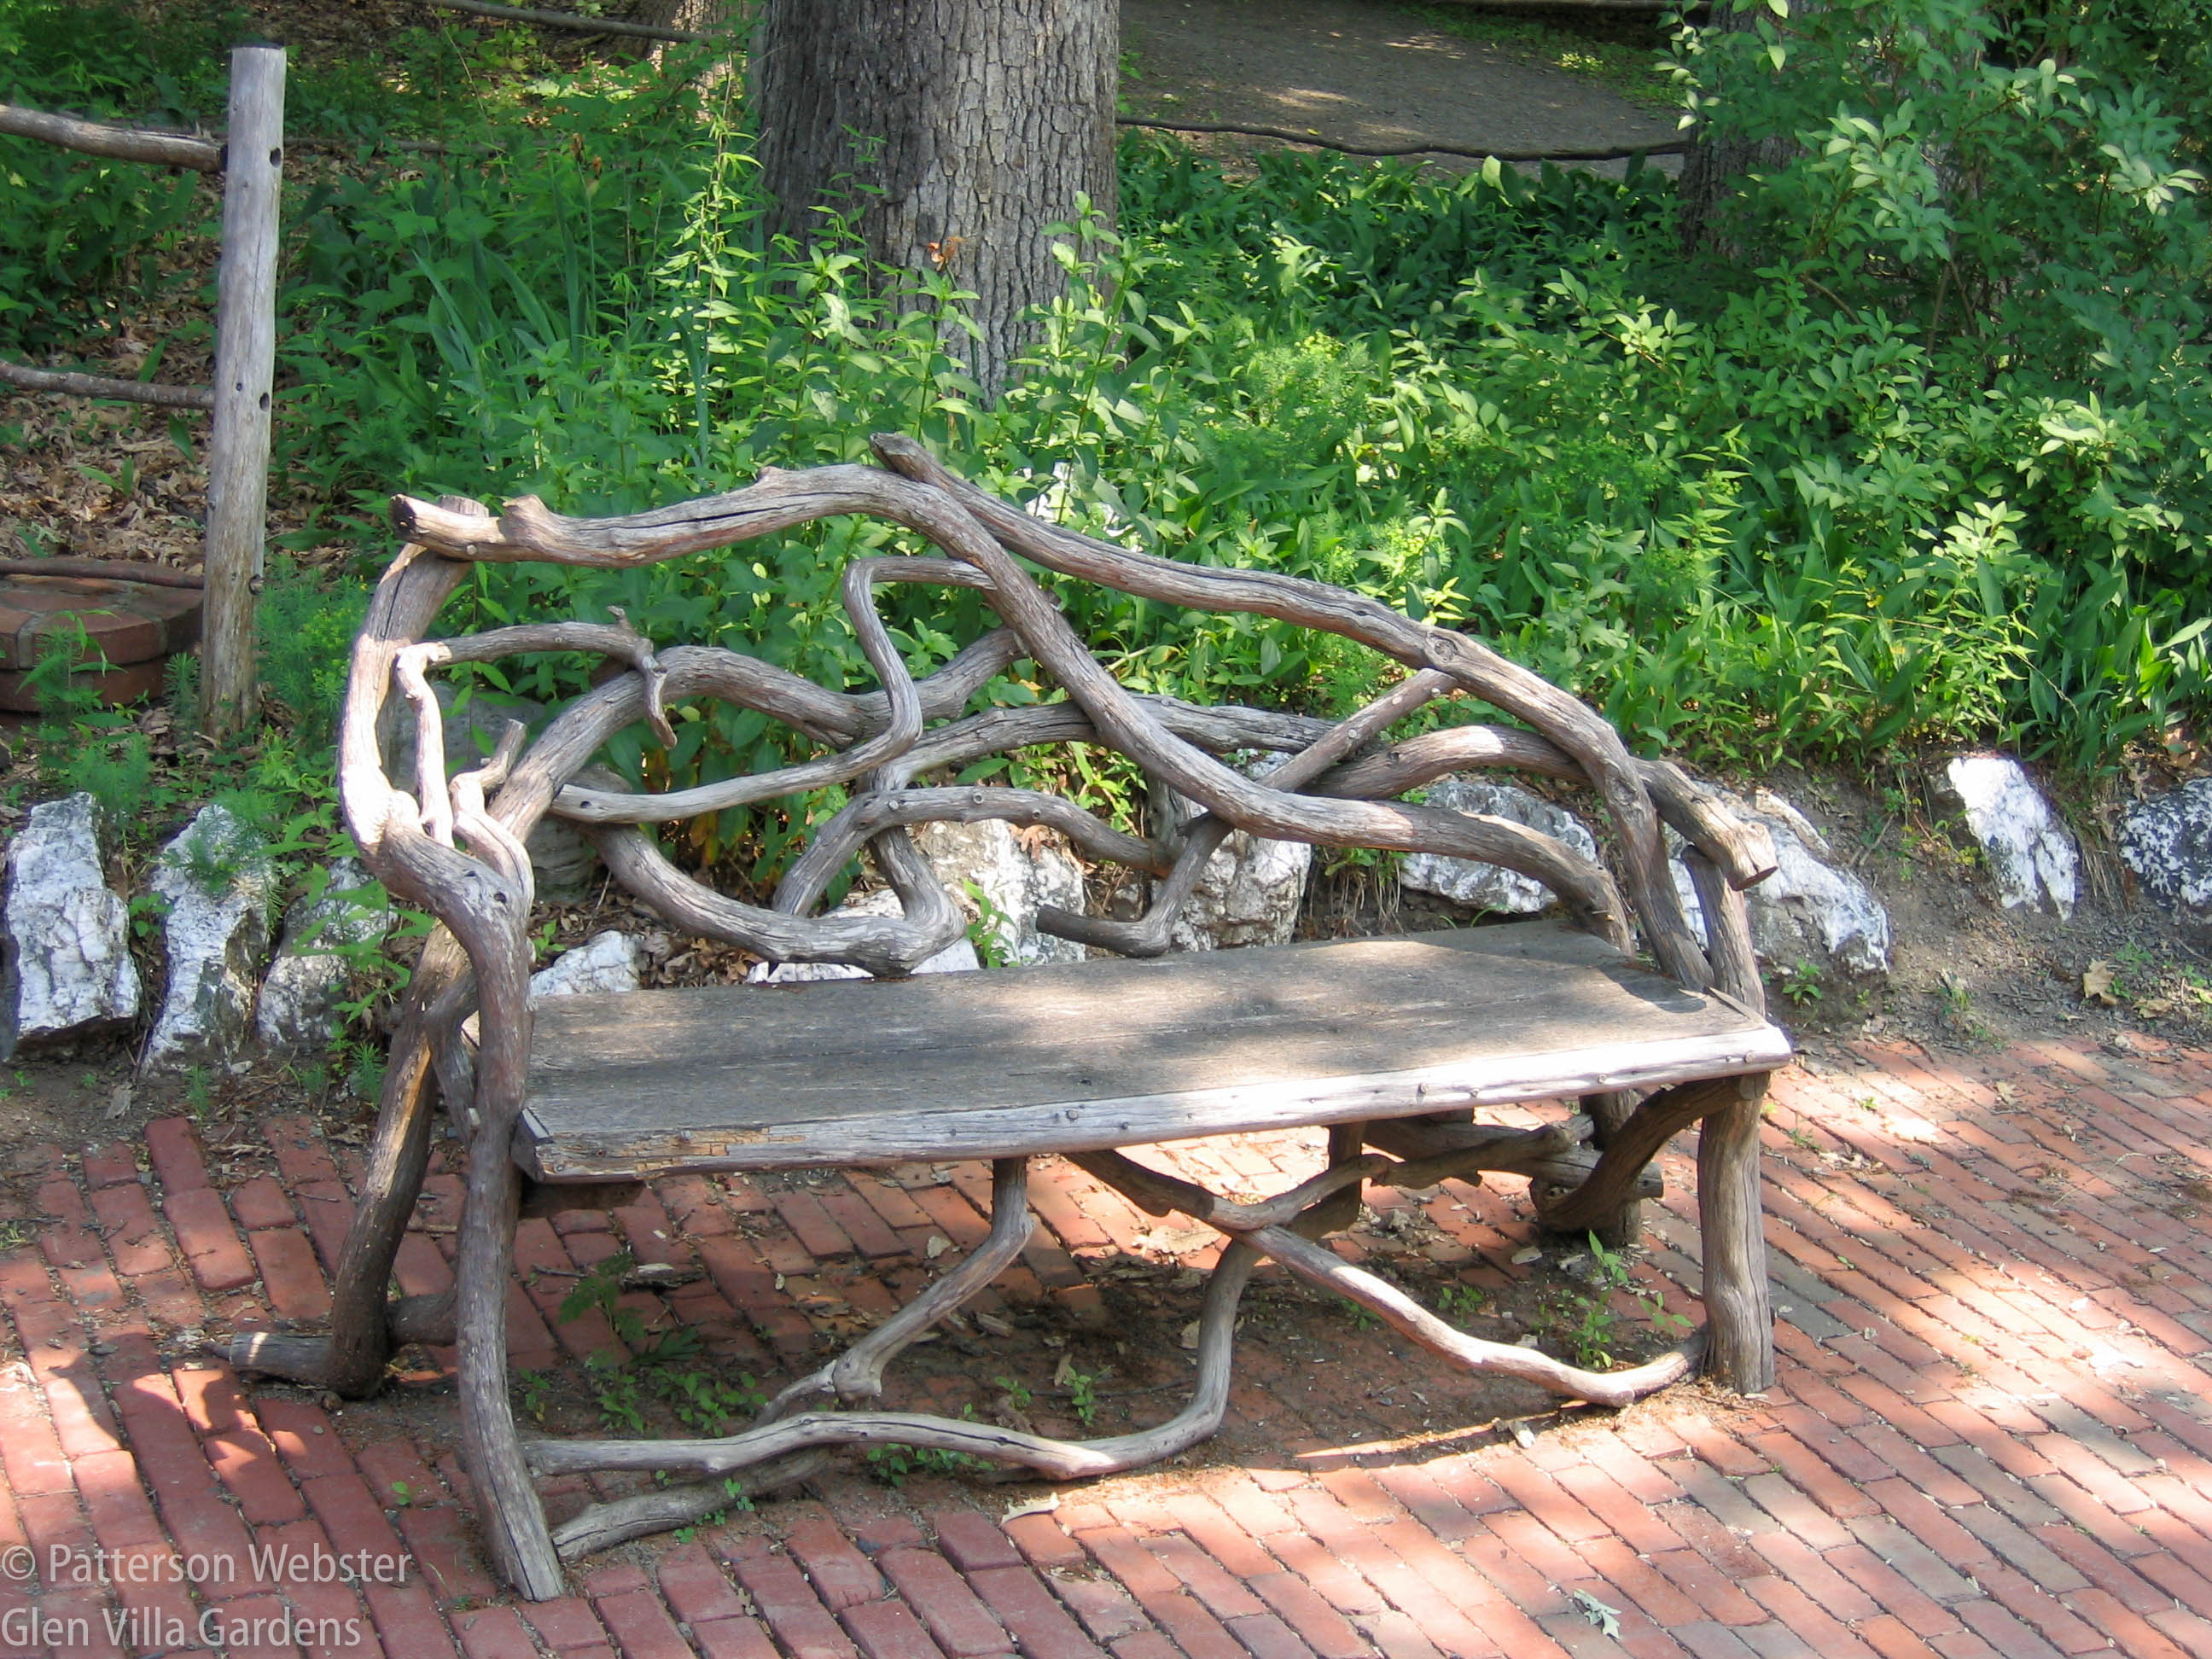 A bench at Olana, the New York state home of the artist Thomas Church, uses curved branches to create an appealing bench.